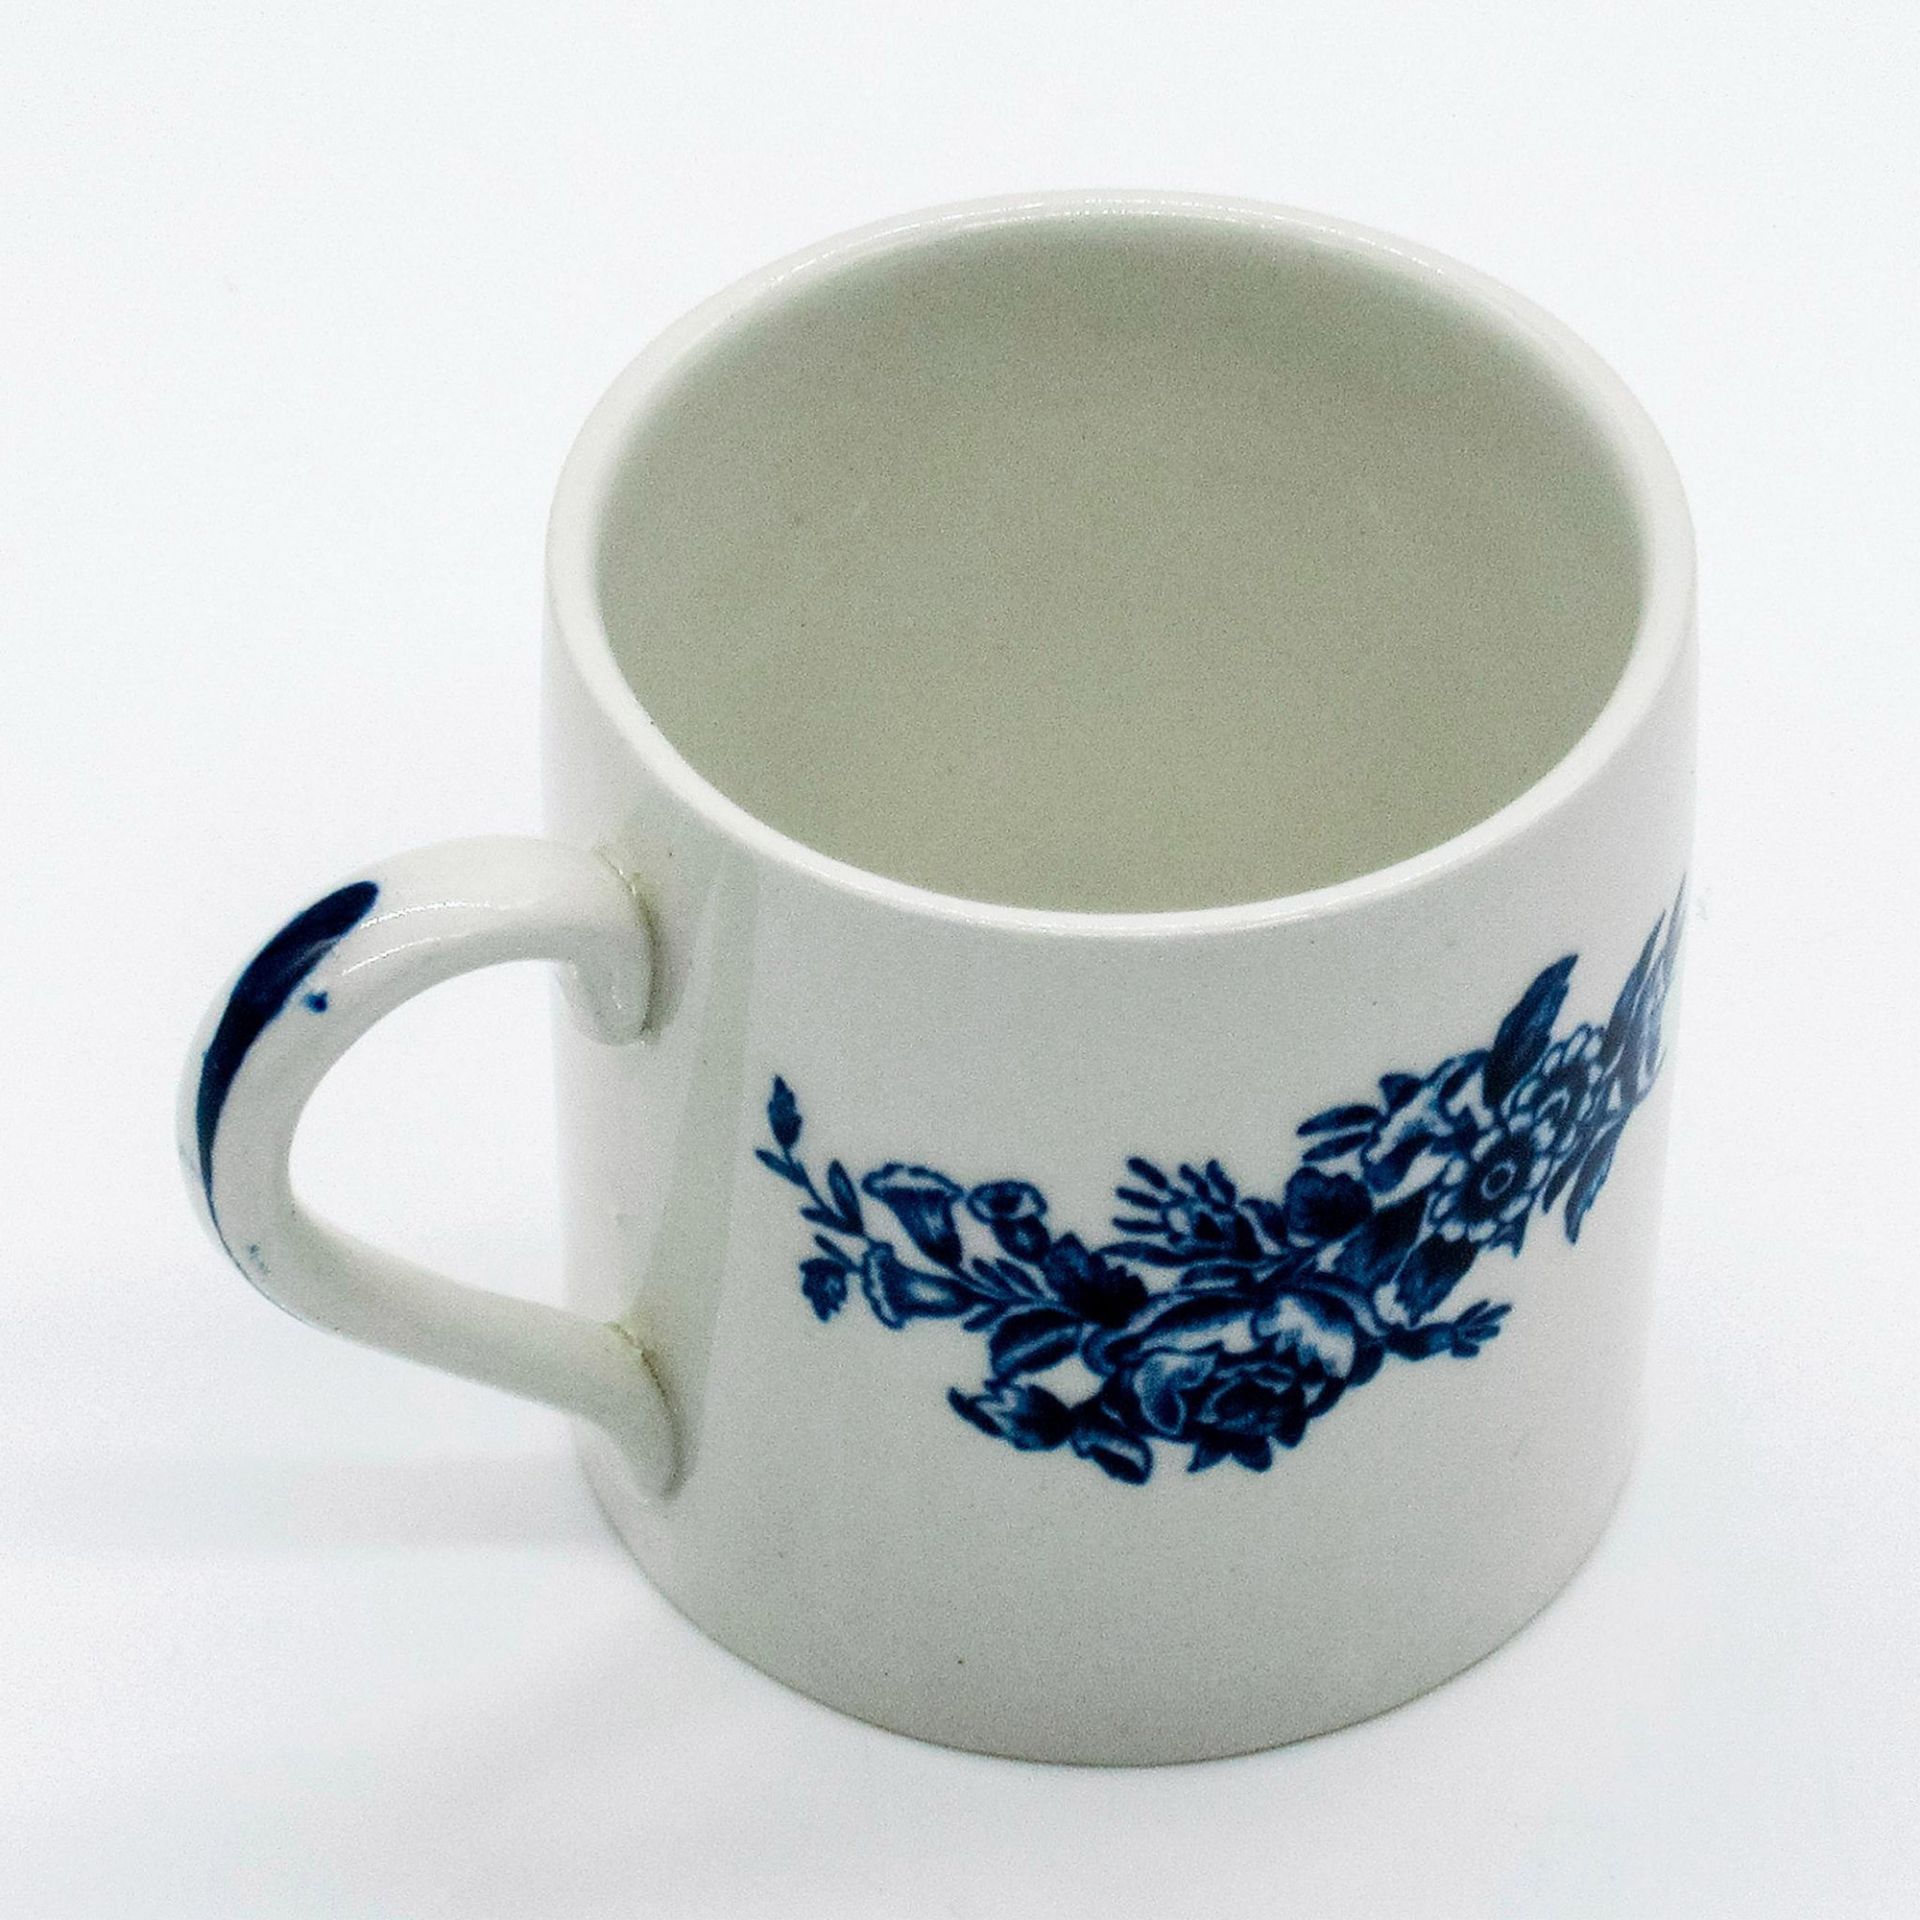 Vintage Booths Espresso Cup, Peony A8021 - Image 5 of 5